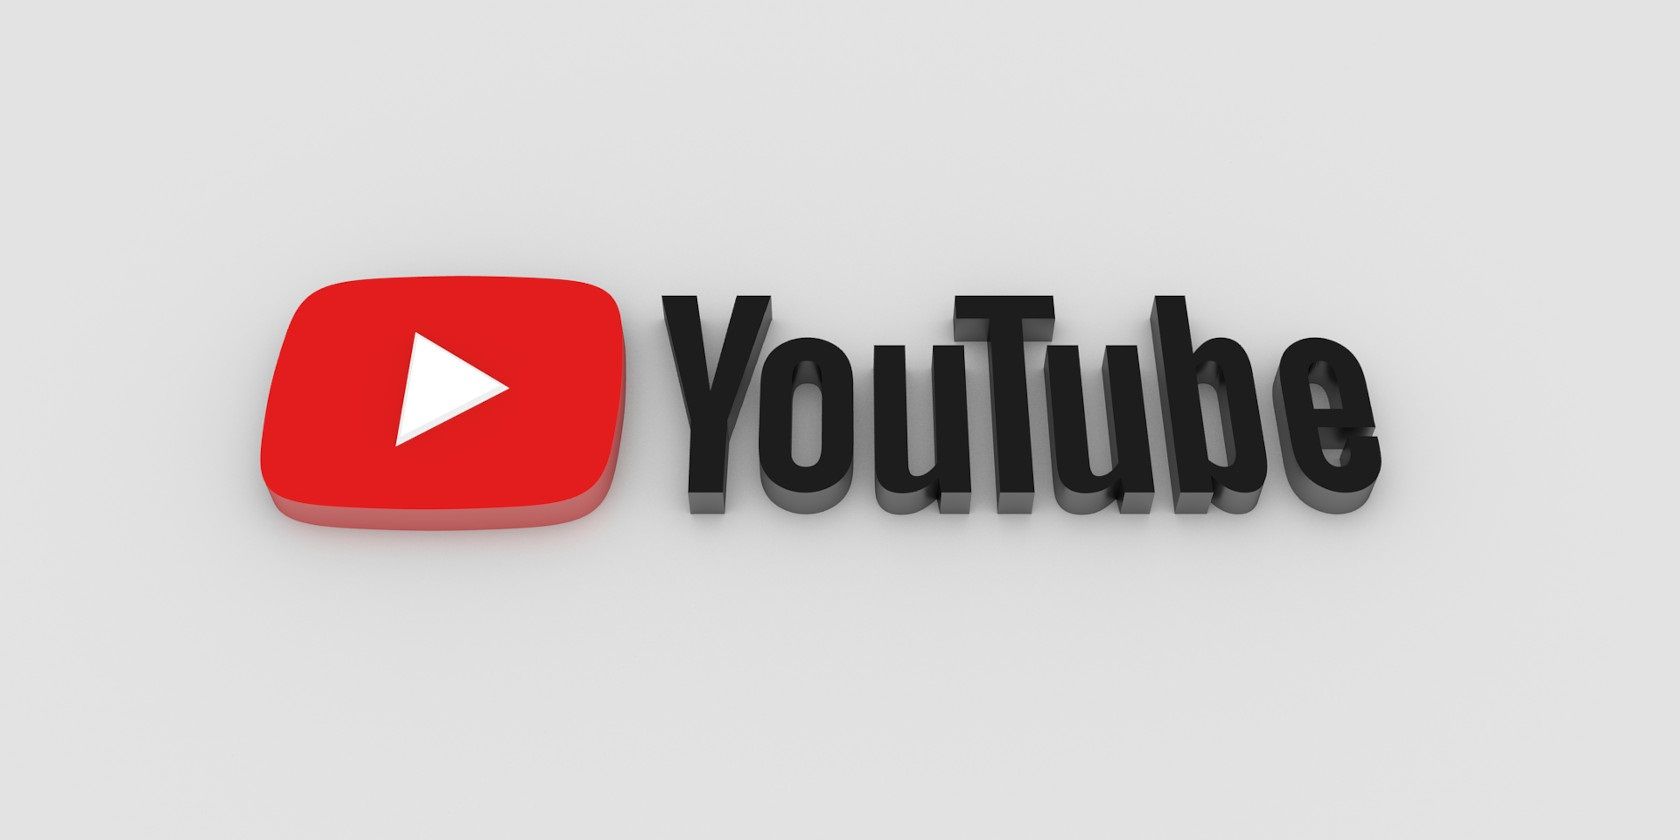 the YouTube logo in front of the white background